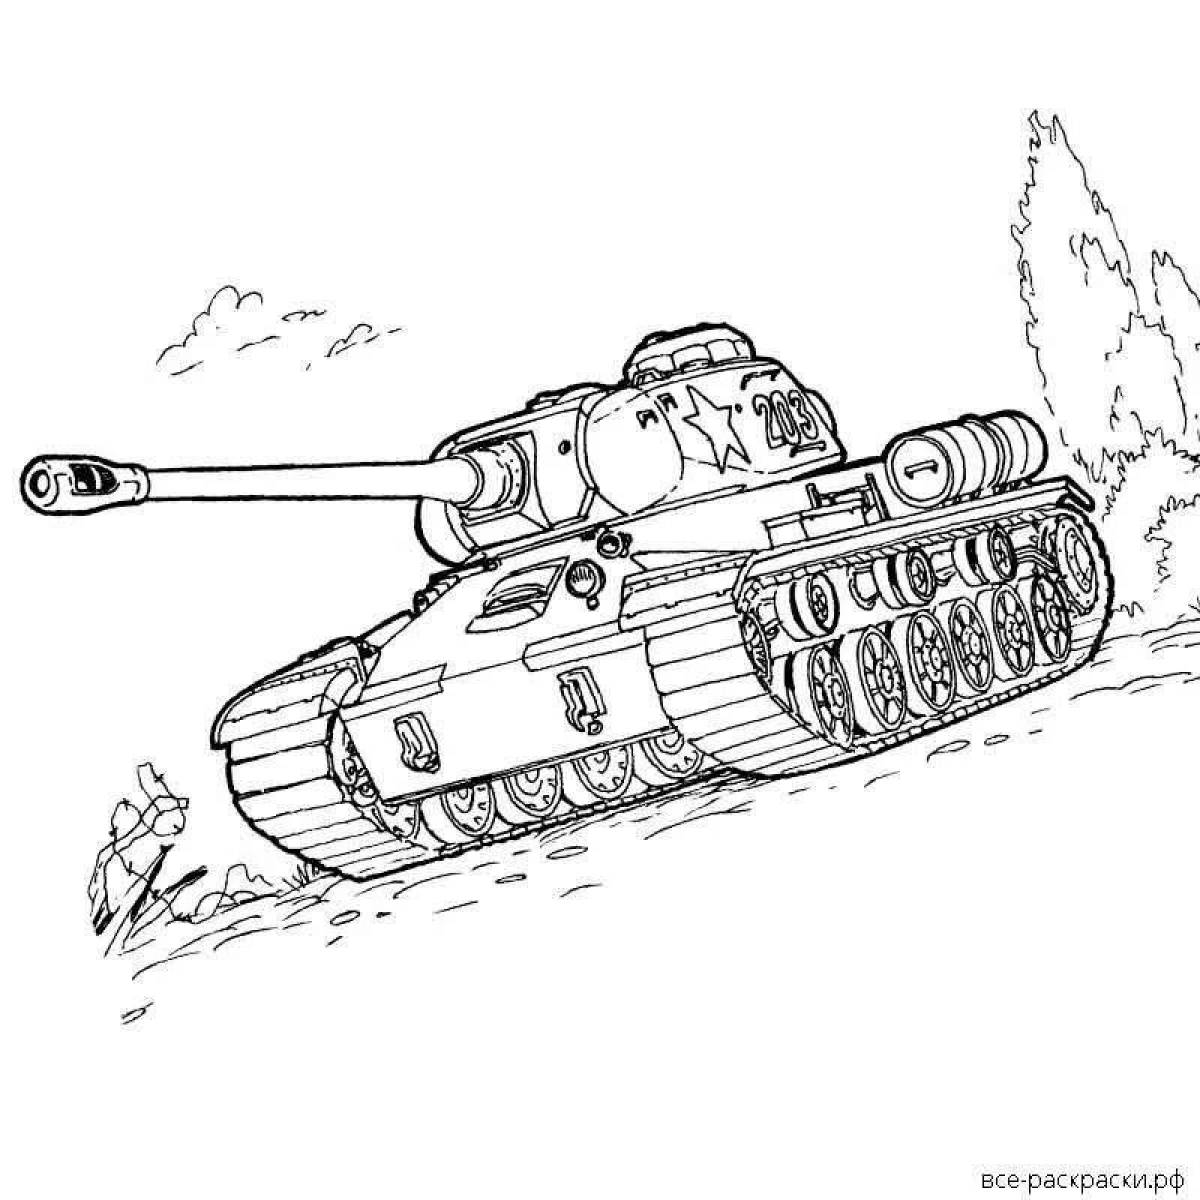 Coloring improved ussr tanks